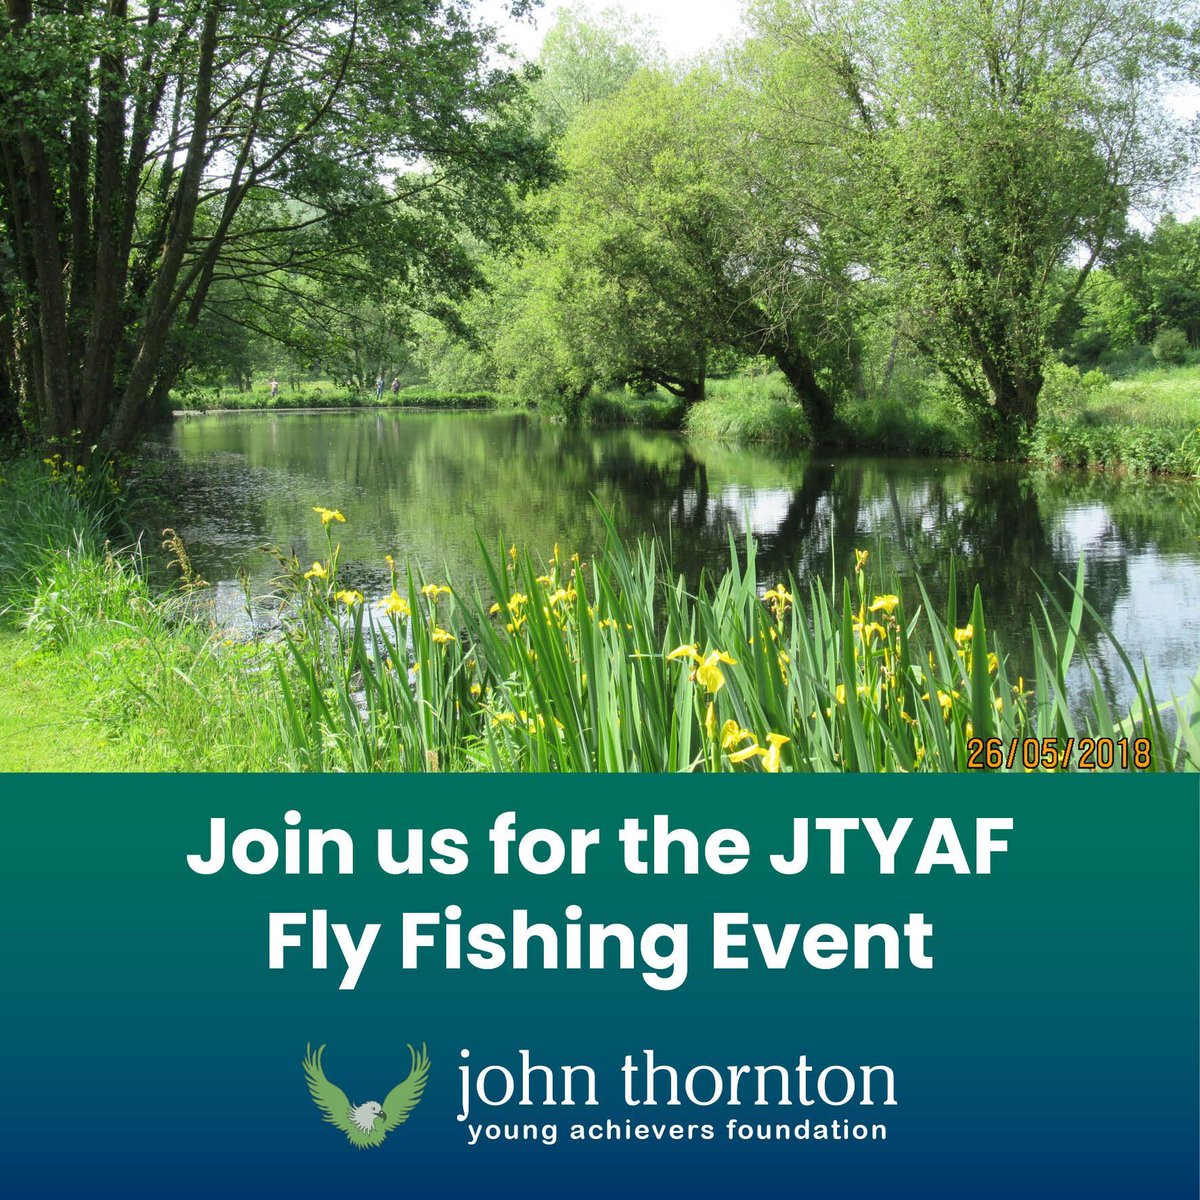 Join us for the #JTYAF #fishing event on Saturday 22nd June 🎣 The price is £80 for 4 fish which includes a donation to the charity and a day rod licence will be required. Tea and coffee will be served during the day and BBQ hot dogs will be provided at midday. #charity